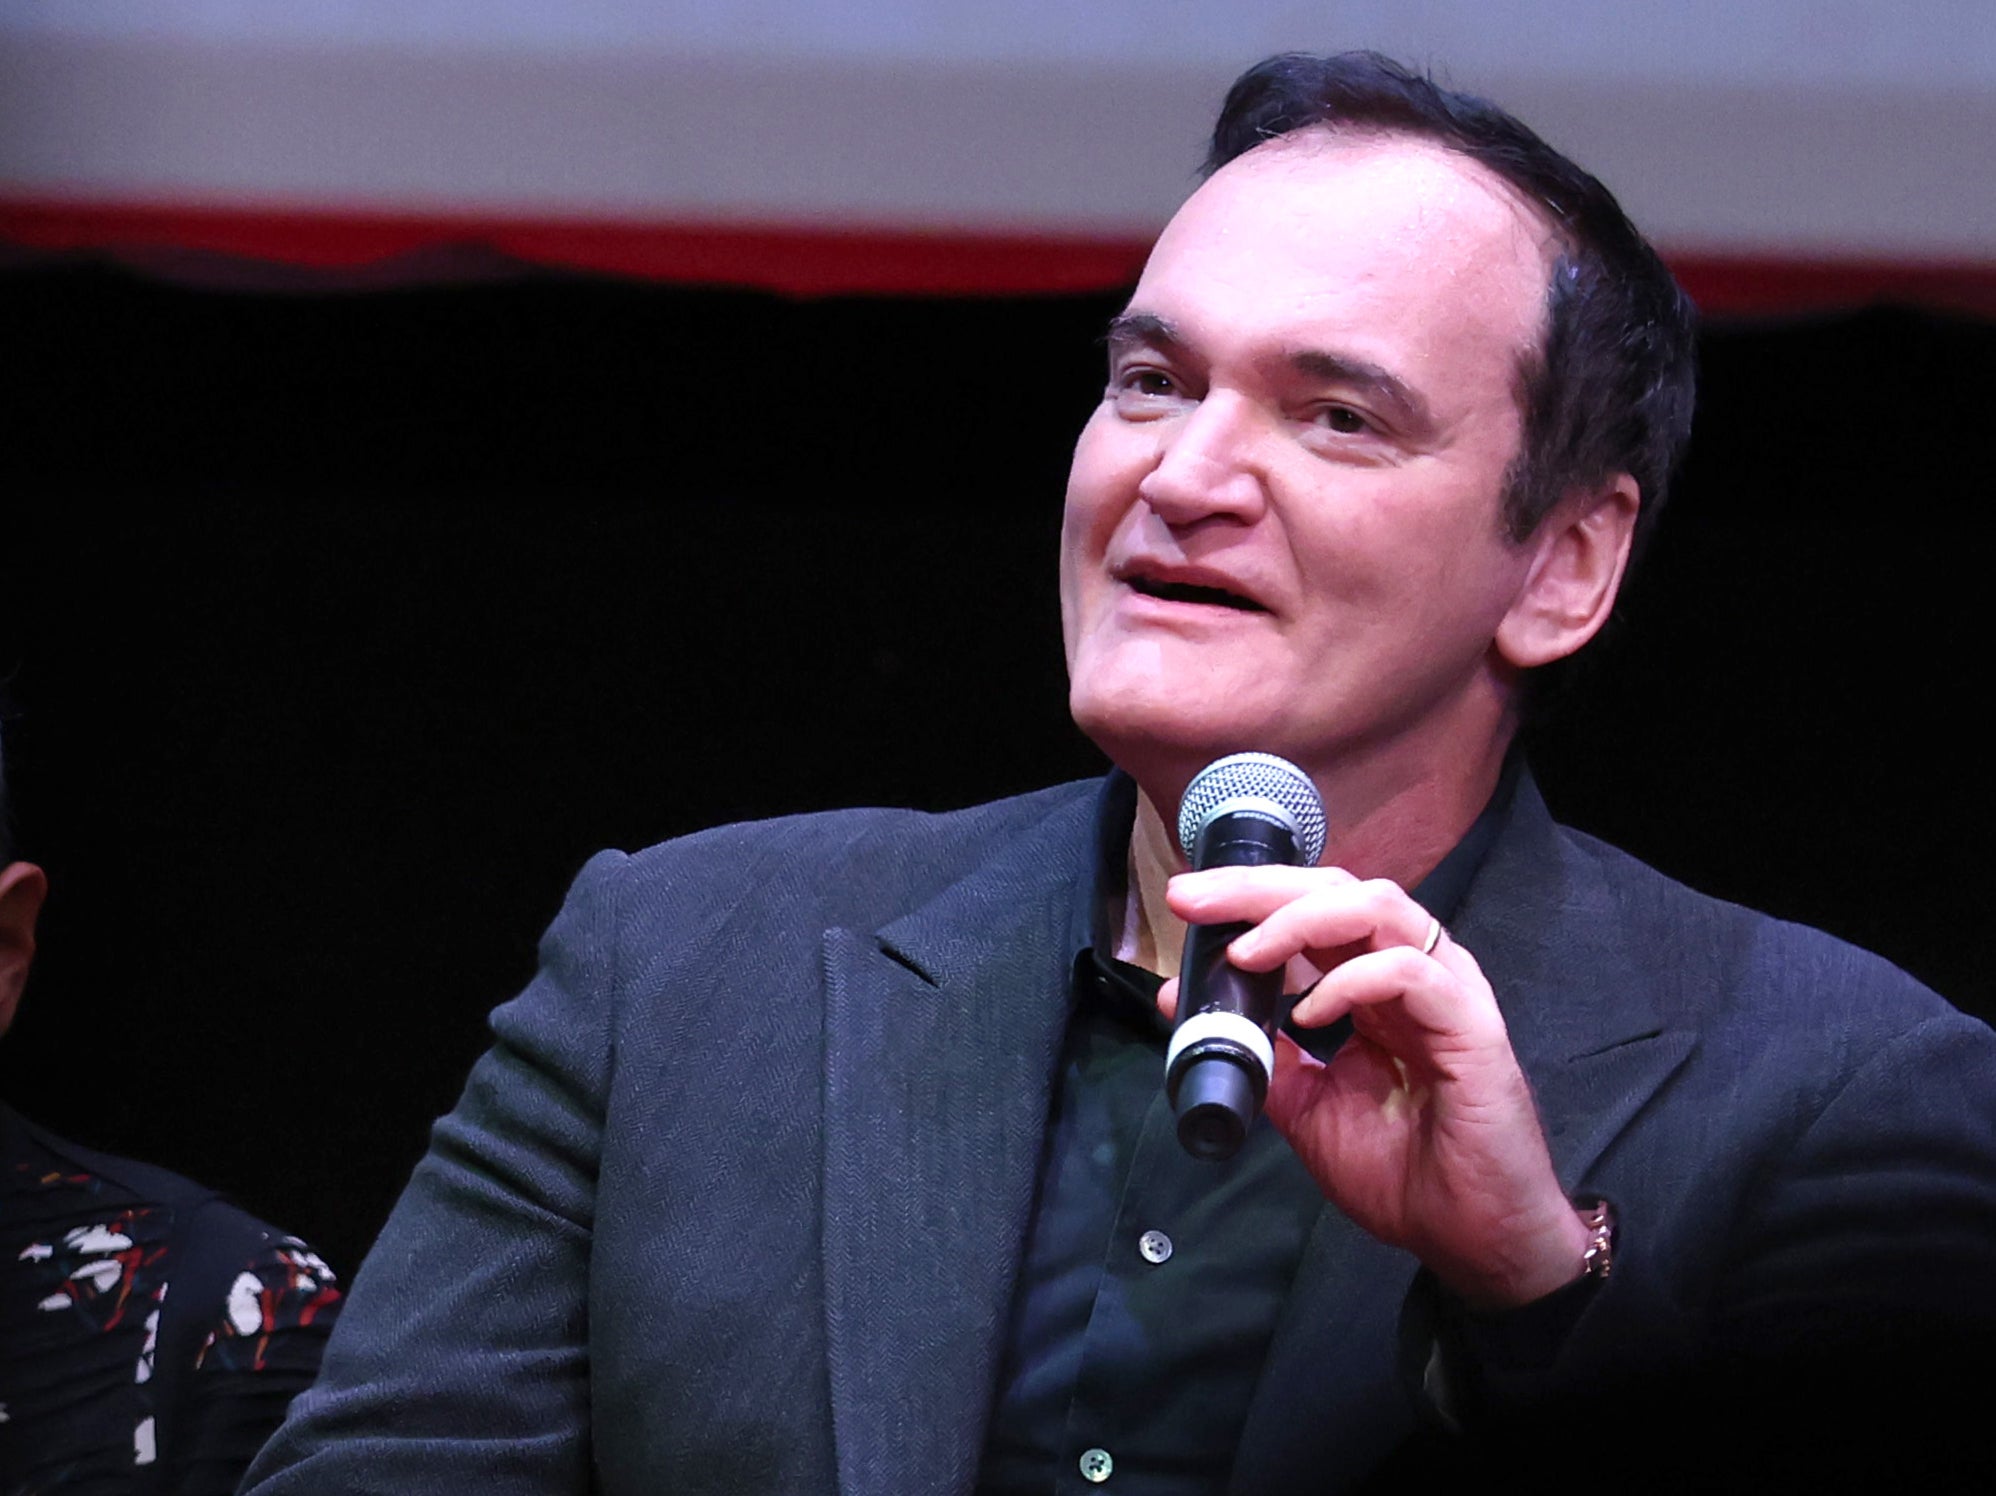 Quentin Tarantino during the 16th Rome Film Fest on 19 October 2021